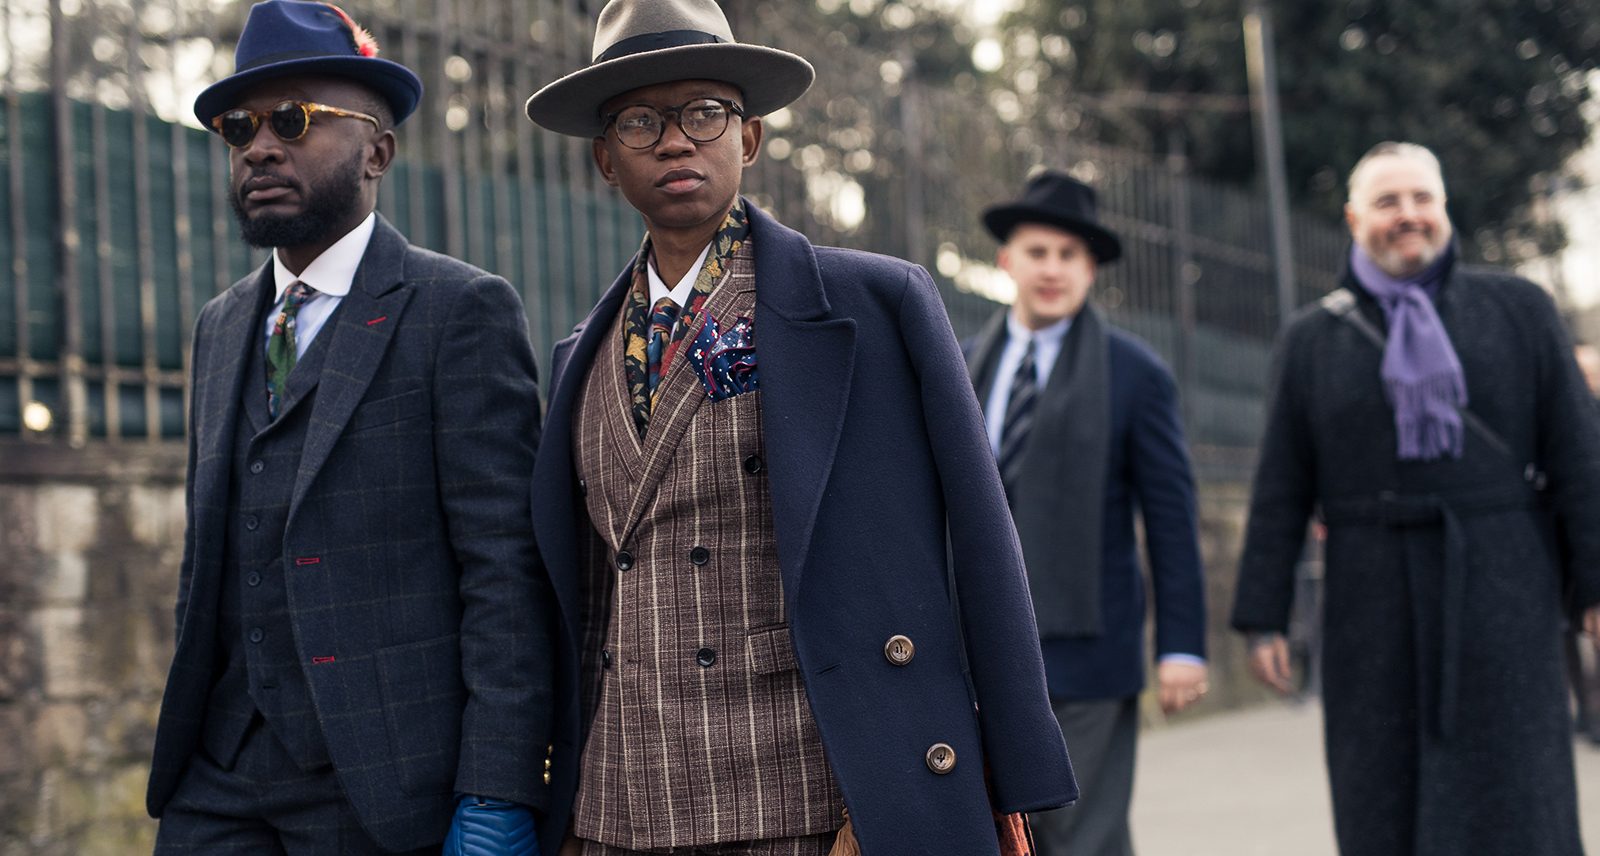 The Finest Street Style at Pitti Uomo 95